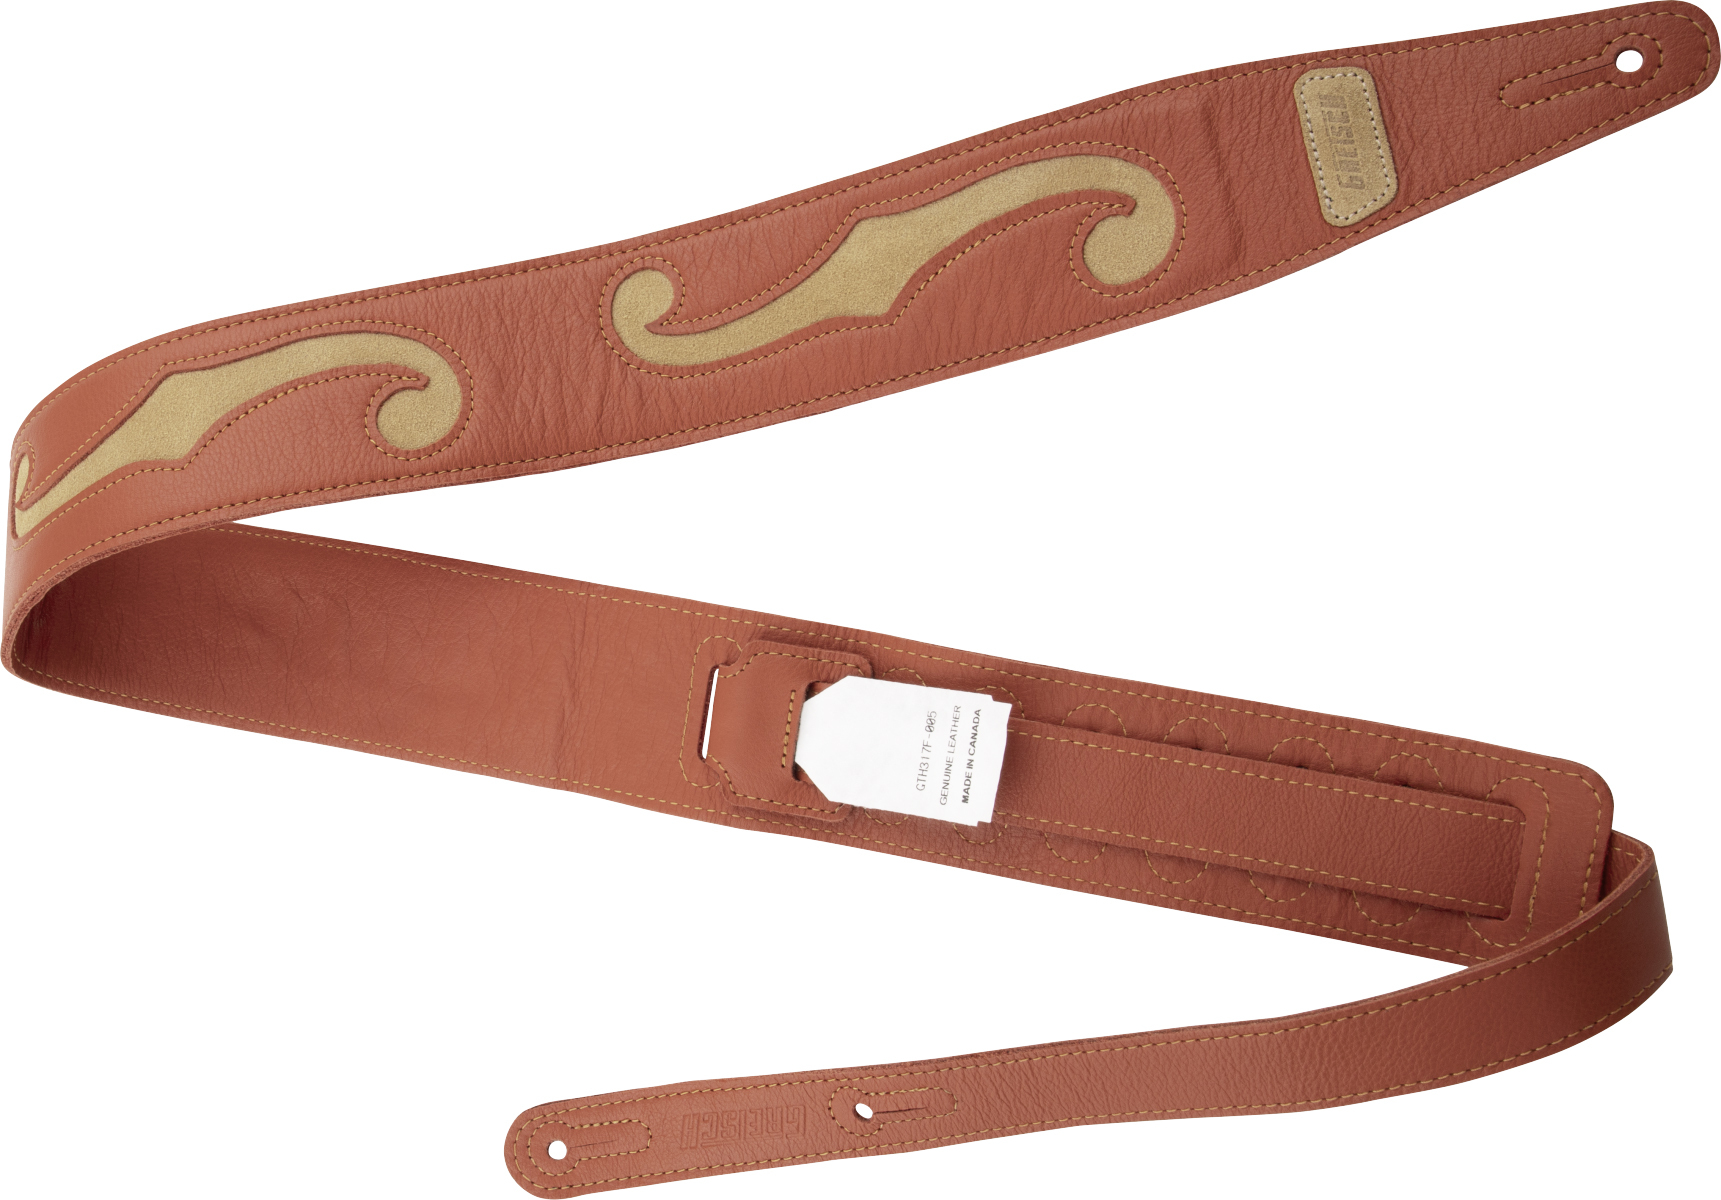 Gretsch F-holes Leather Guitar Strap 3-inch Cuir Orange & Tan - Sangle Courroie - Main picture